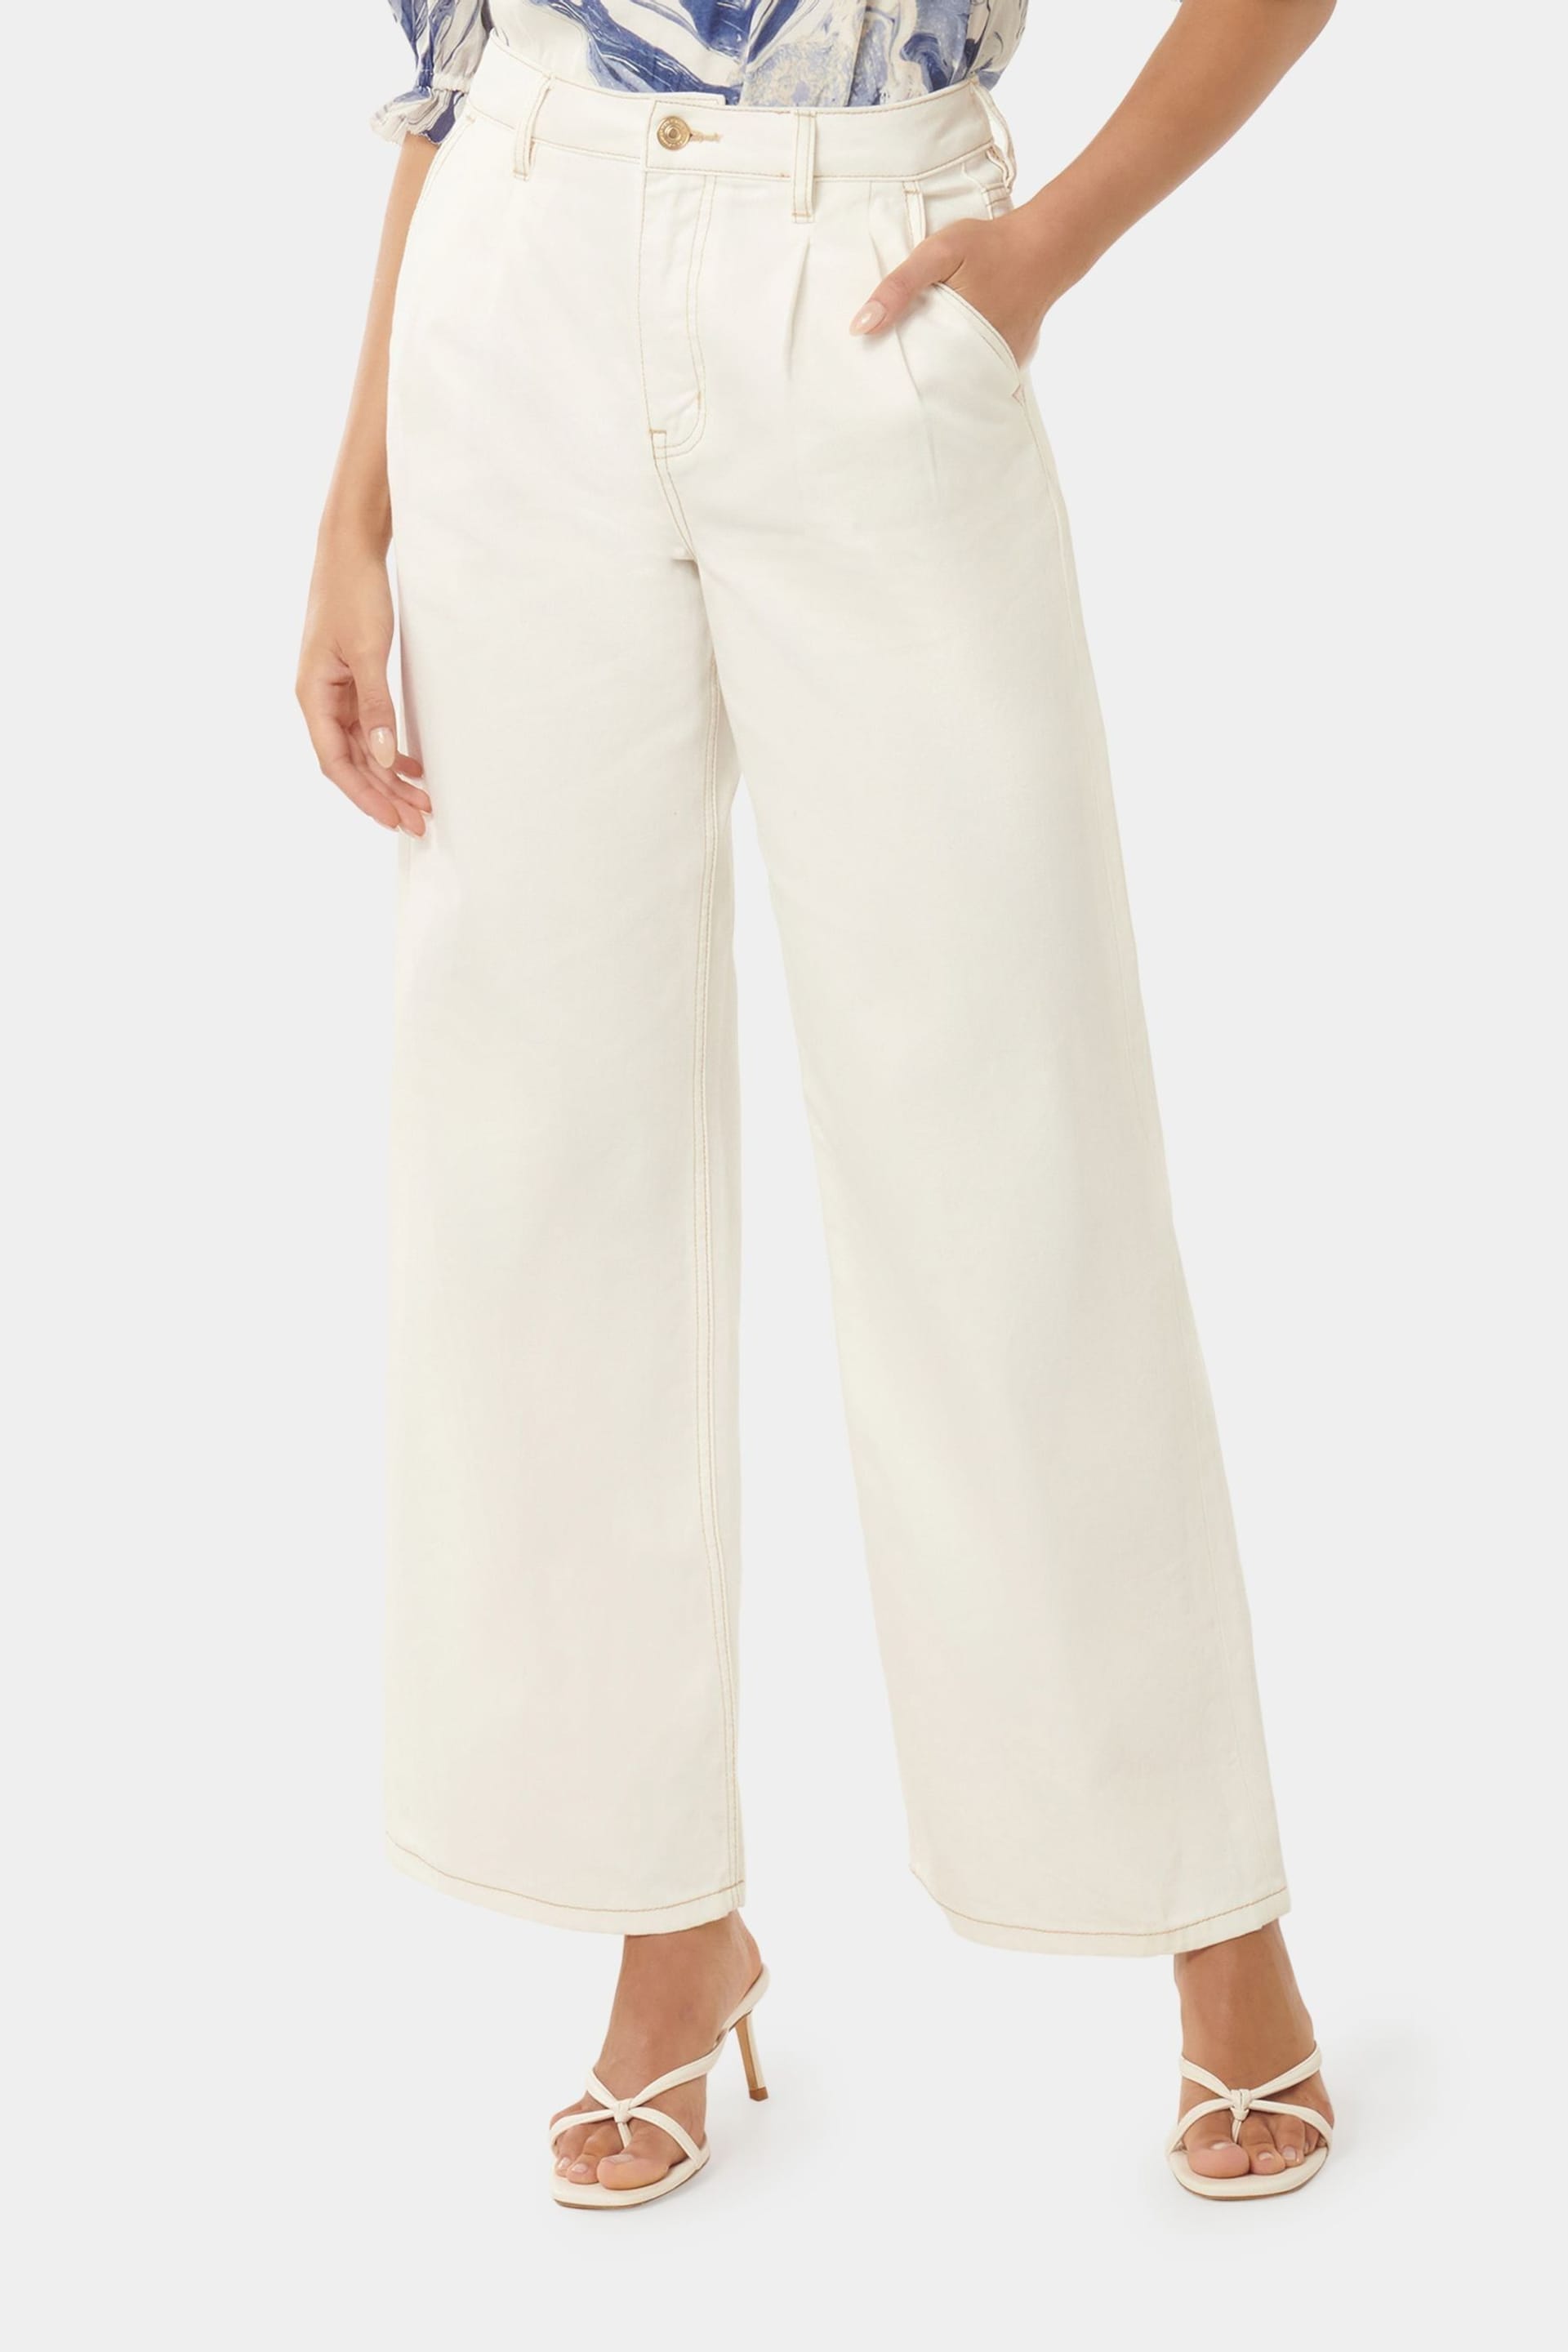 Forever New White Pippa Wide Leg Jeans - Image 1 of 5